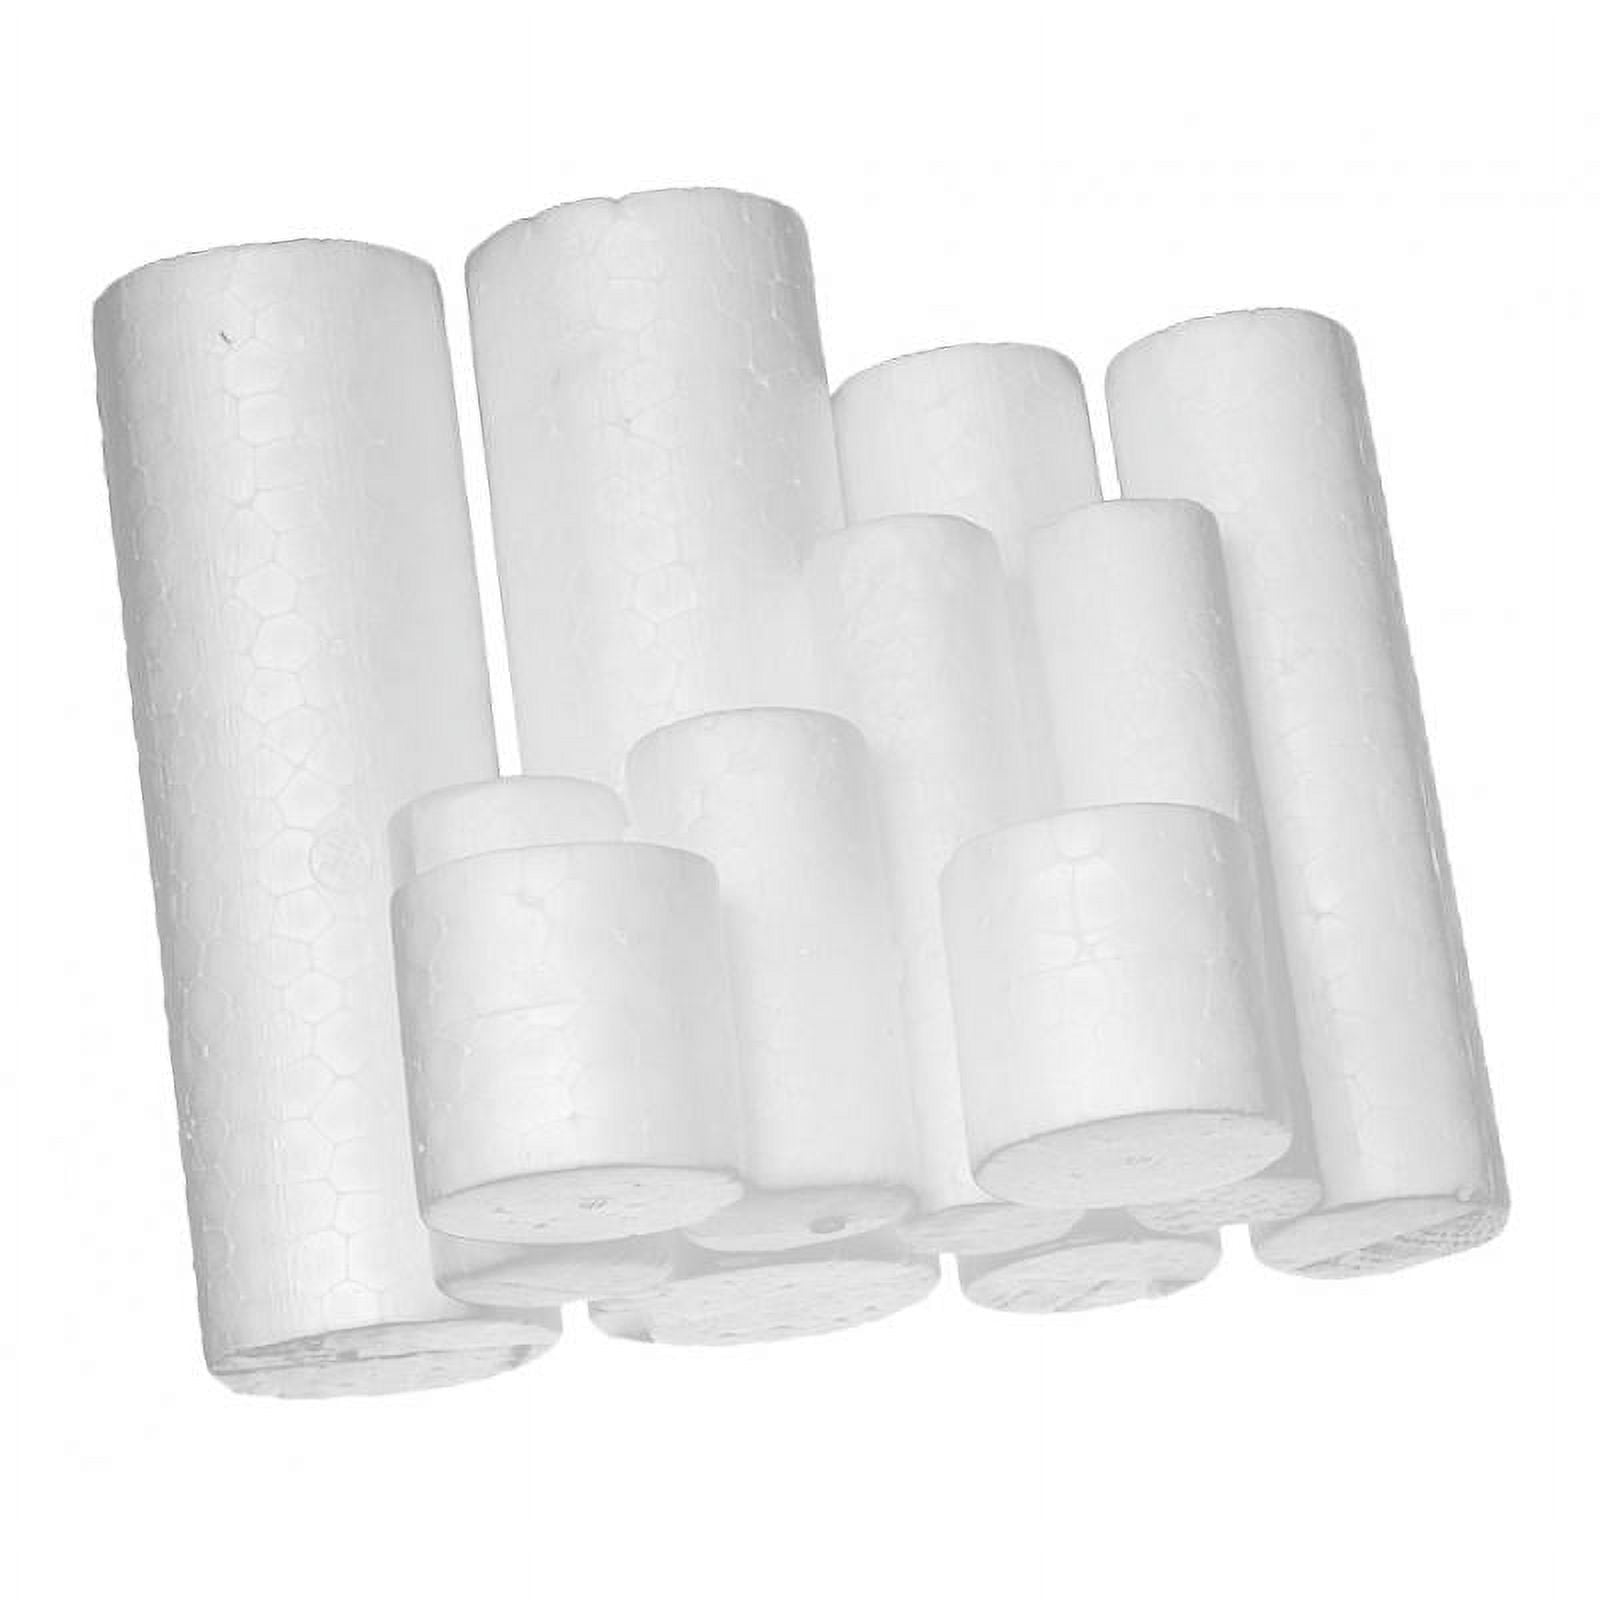 DOITOOL 12PCS Foam Cylinders for Crafts, Floral Foam Blocks Foam Cylinders  for Modeling, DIY Crafts and Arts Supplies